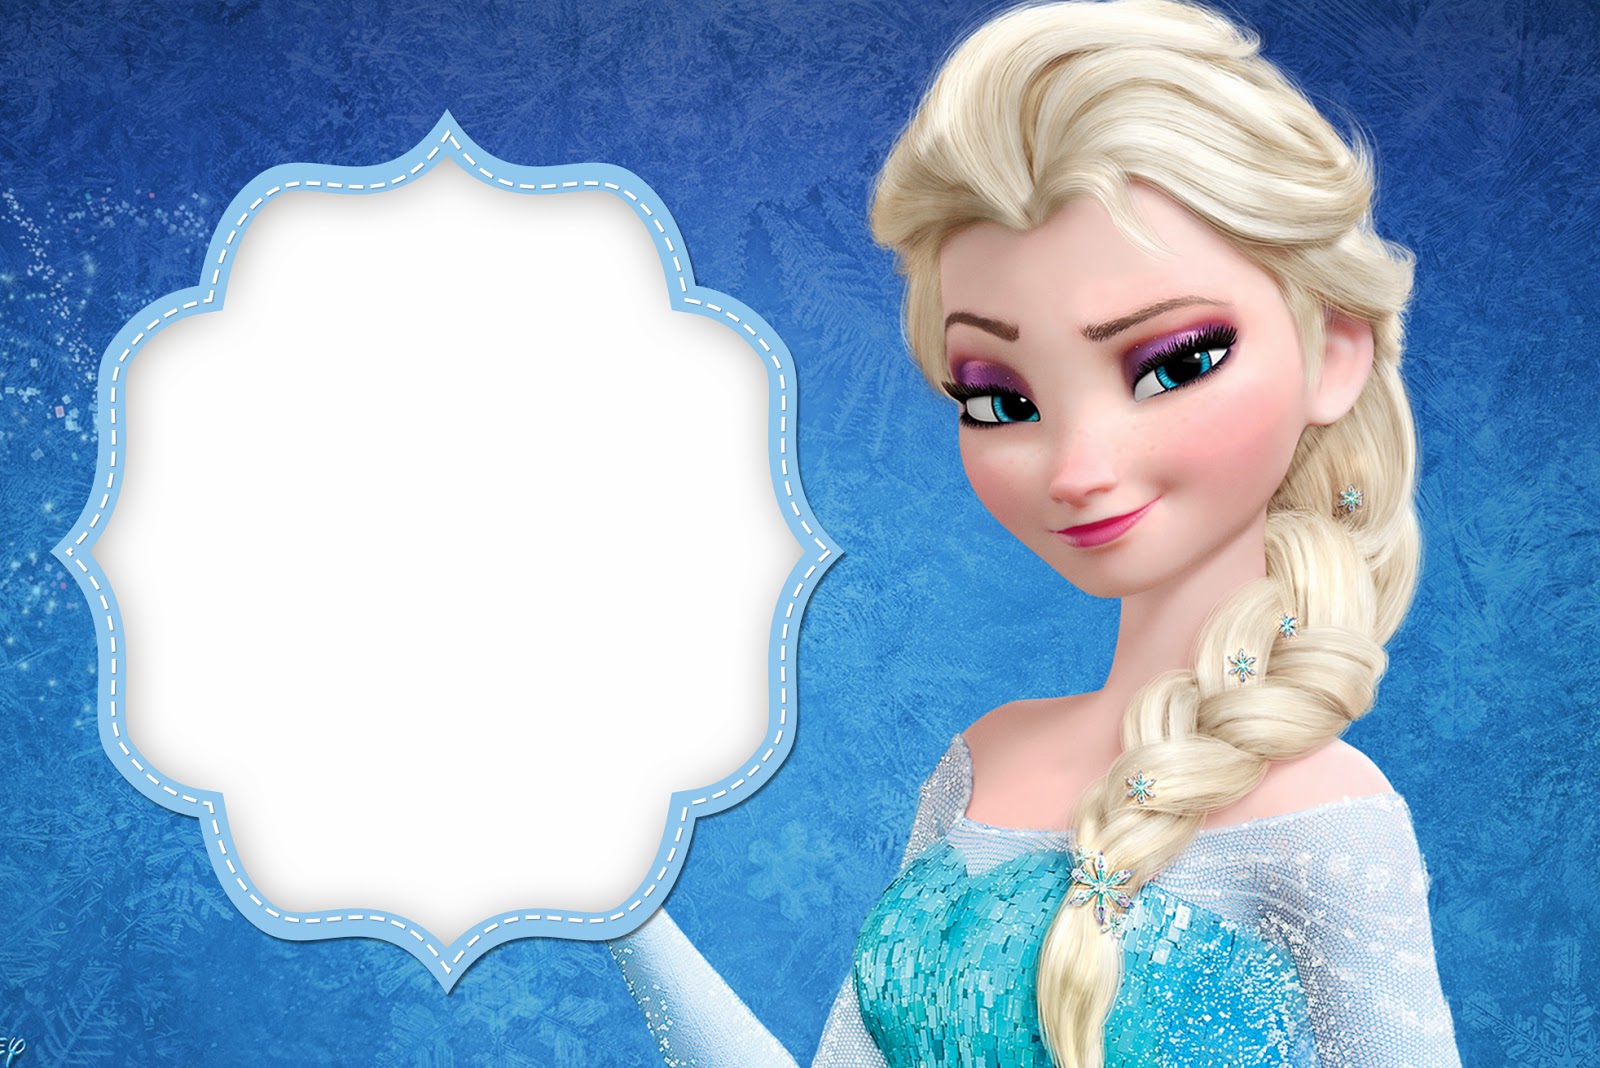 Frozen Free Printable Cards or Party Invitations Oh My Fiesta in